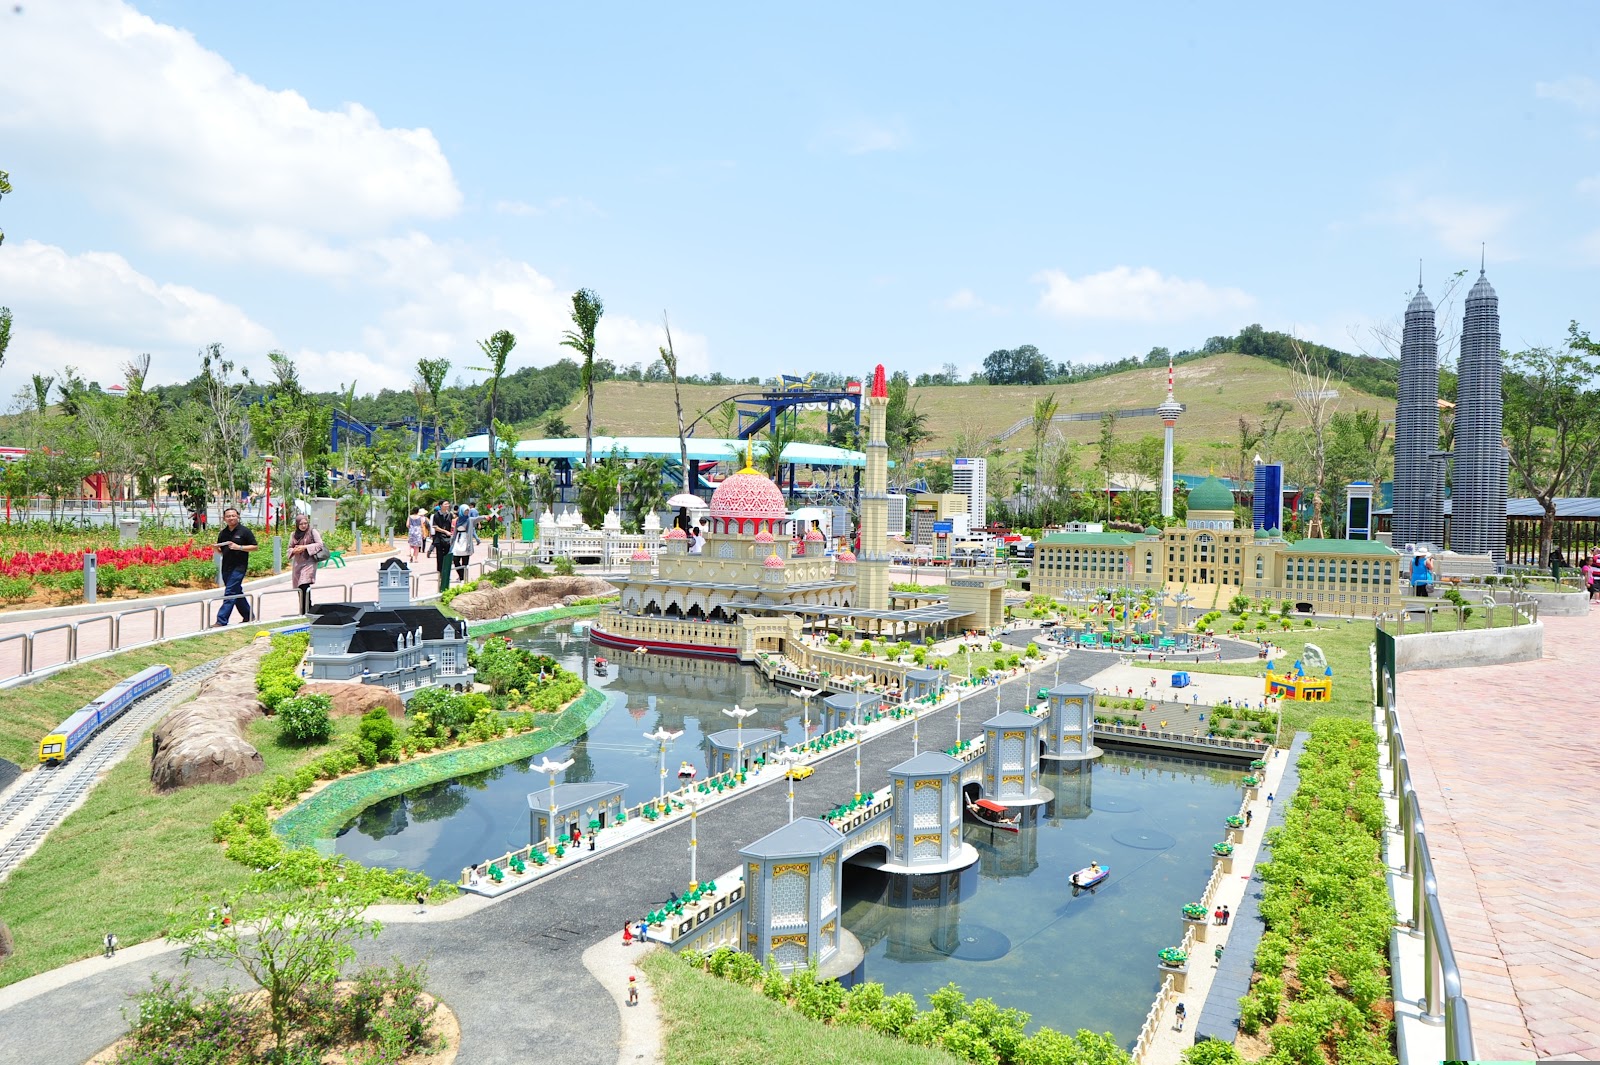 Tourism Attraction in Johor: Johor Premium Outlet